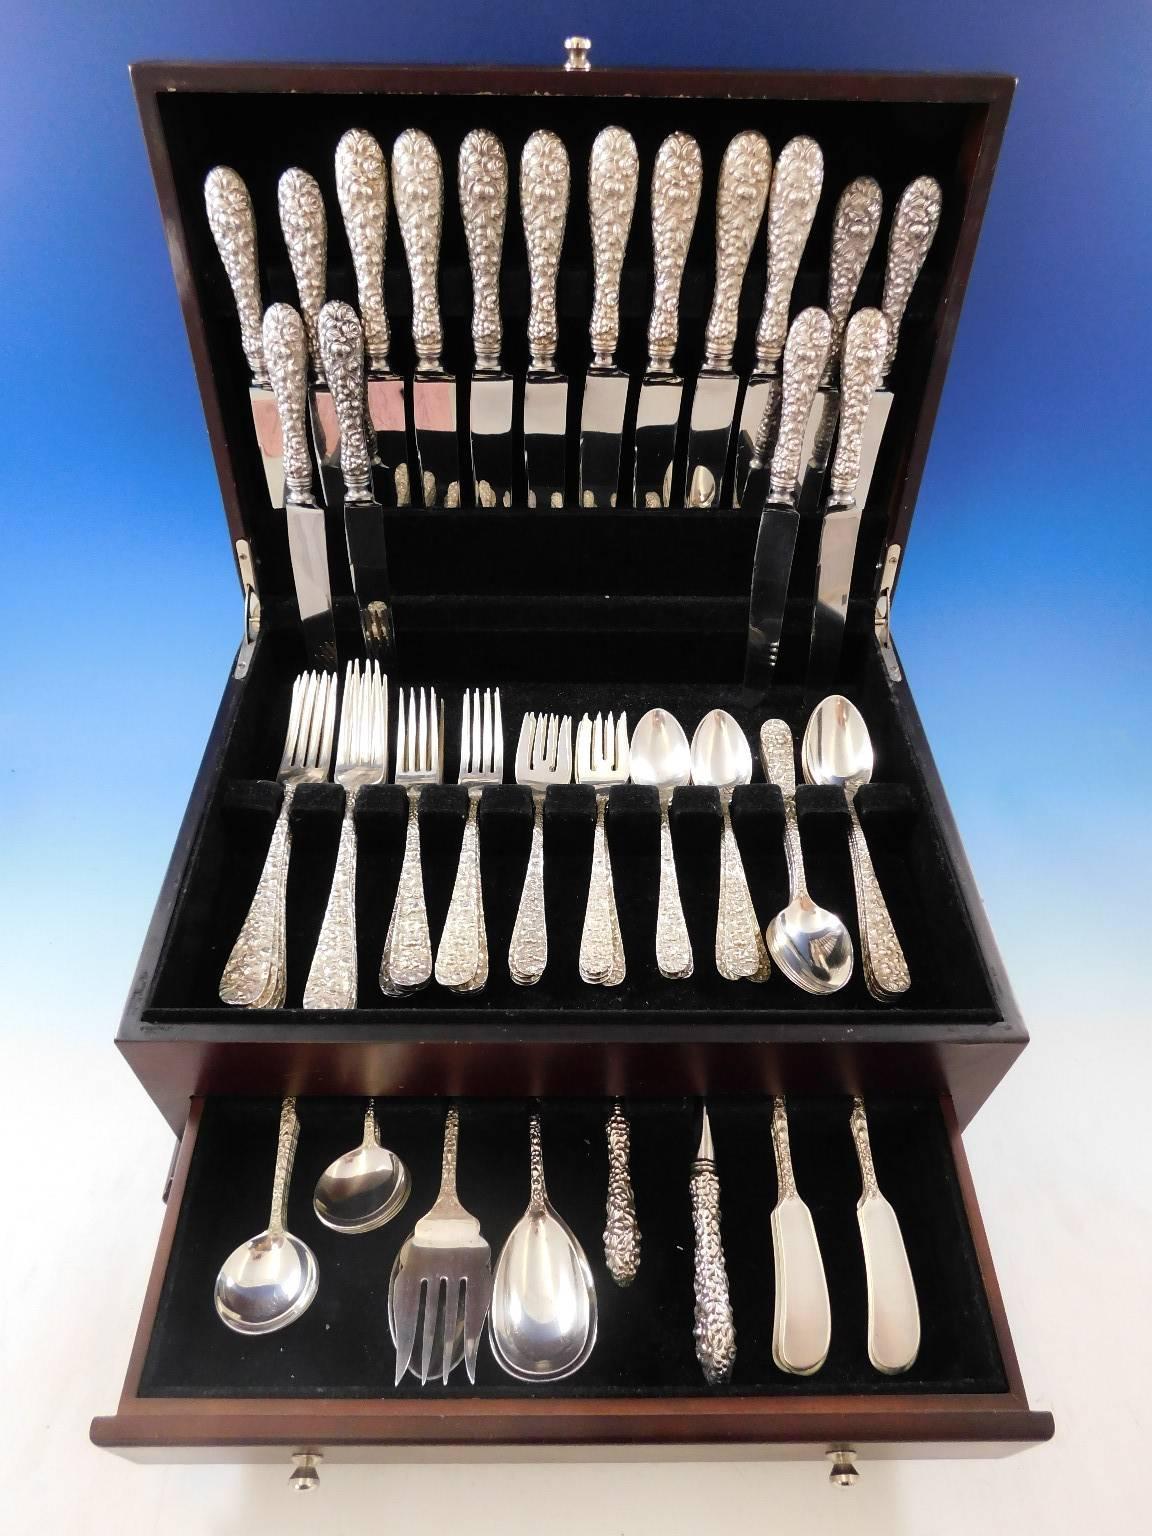 Outstanding Dinner & Luncheon Rose by Stieff sterling silver repousse flatware set, 78 pieces. This set includes:

    8 Dinner Size Knives, 9 5/8